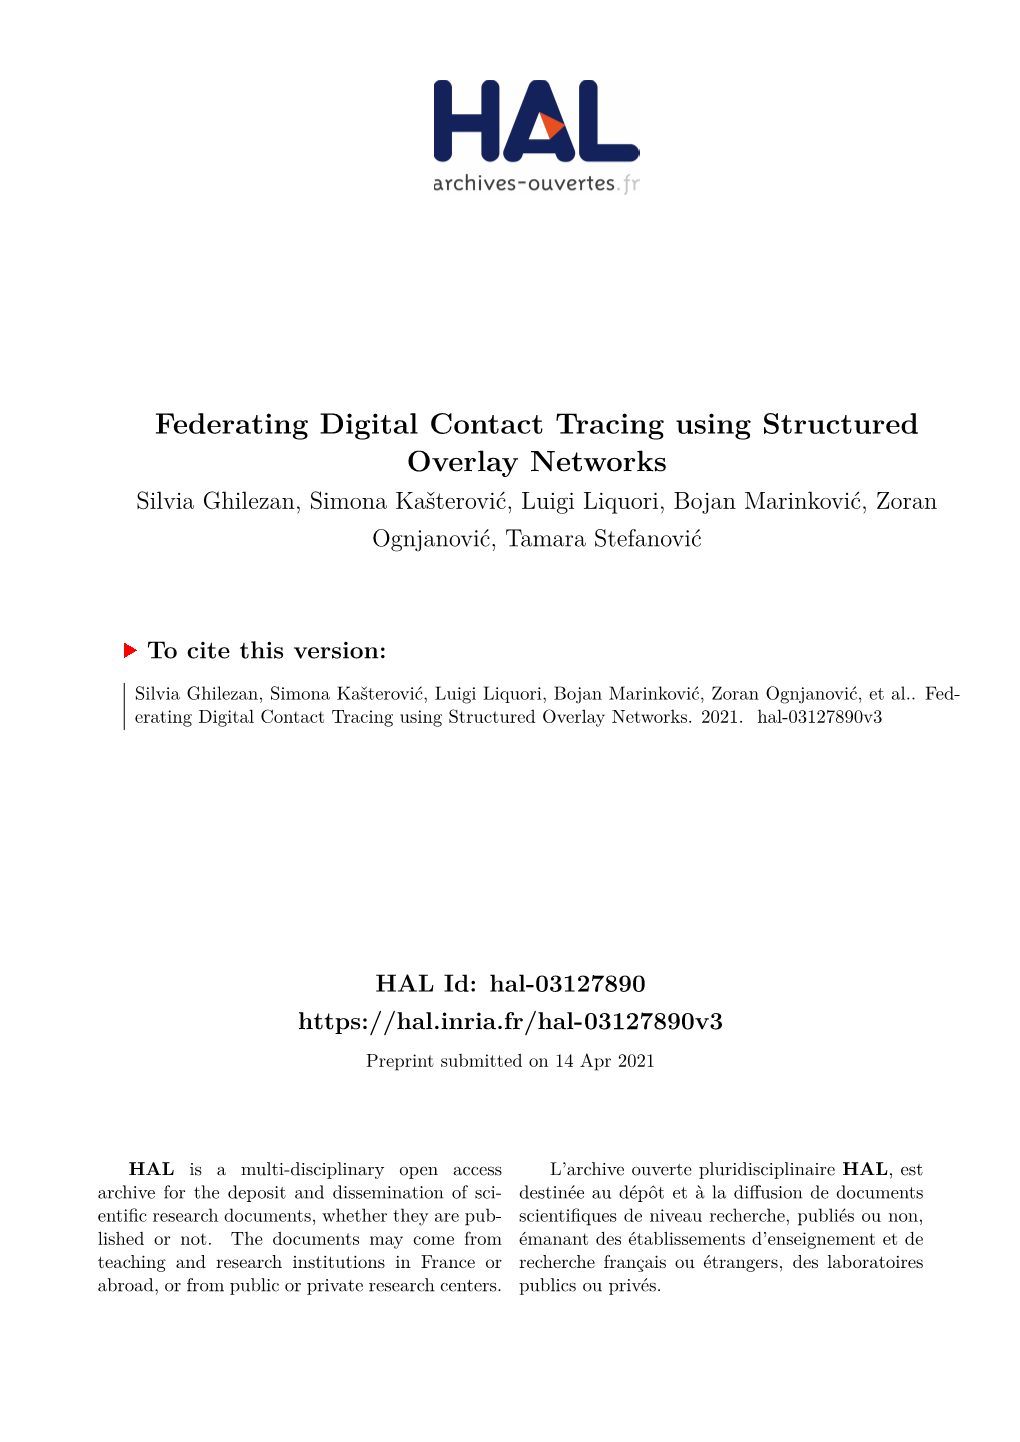 Federating Digital Contact Tracing Using Structured Overlay Networks